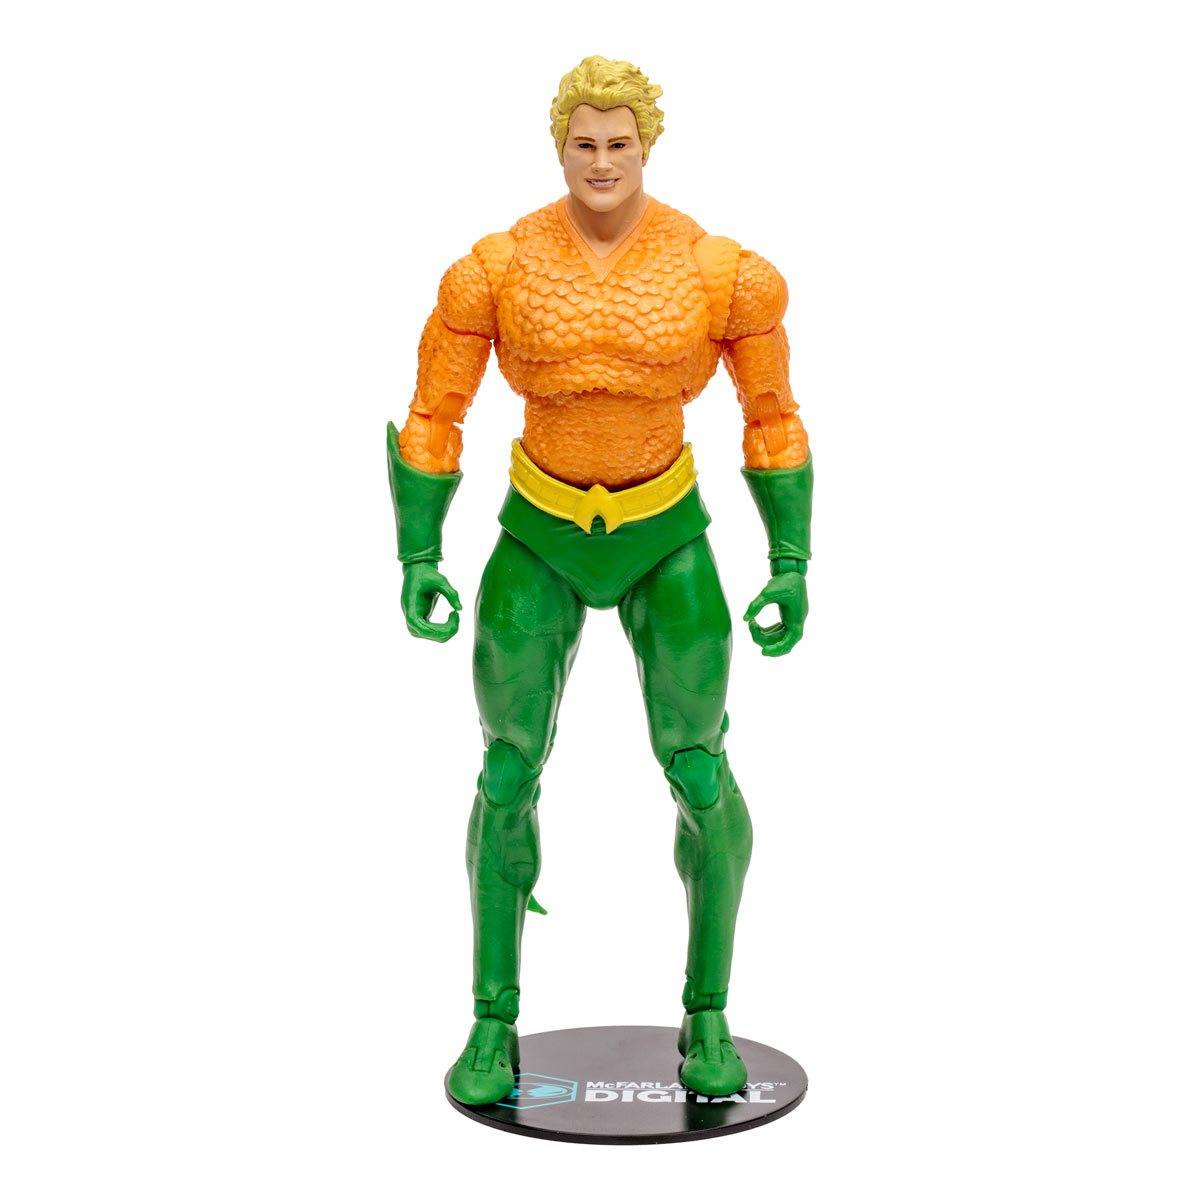 DC Direct Aquaman DC Classic 7-Inch Scale Wave 1 Action Figure with McFarlane Toys Digital Collectible